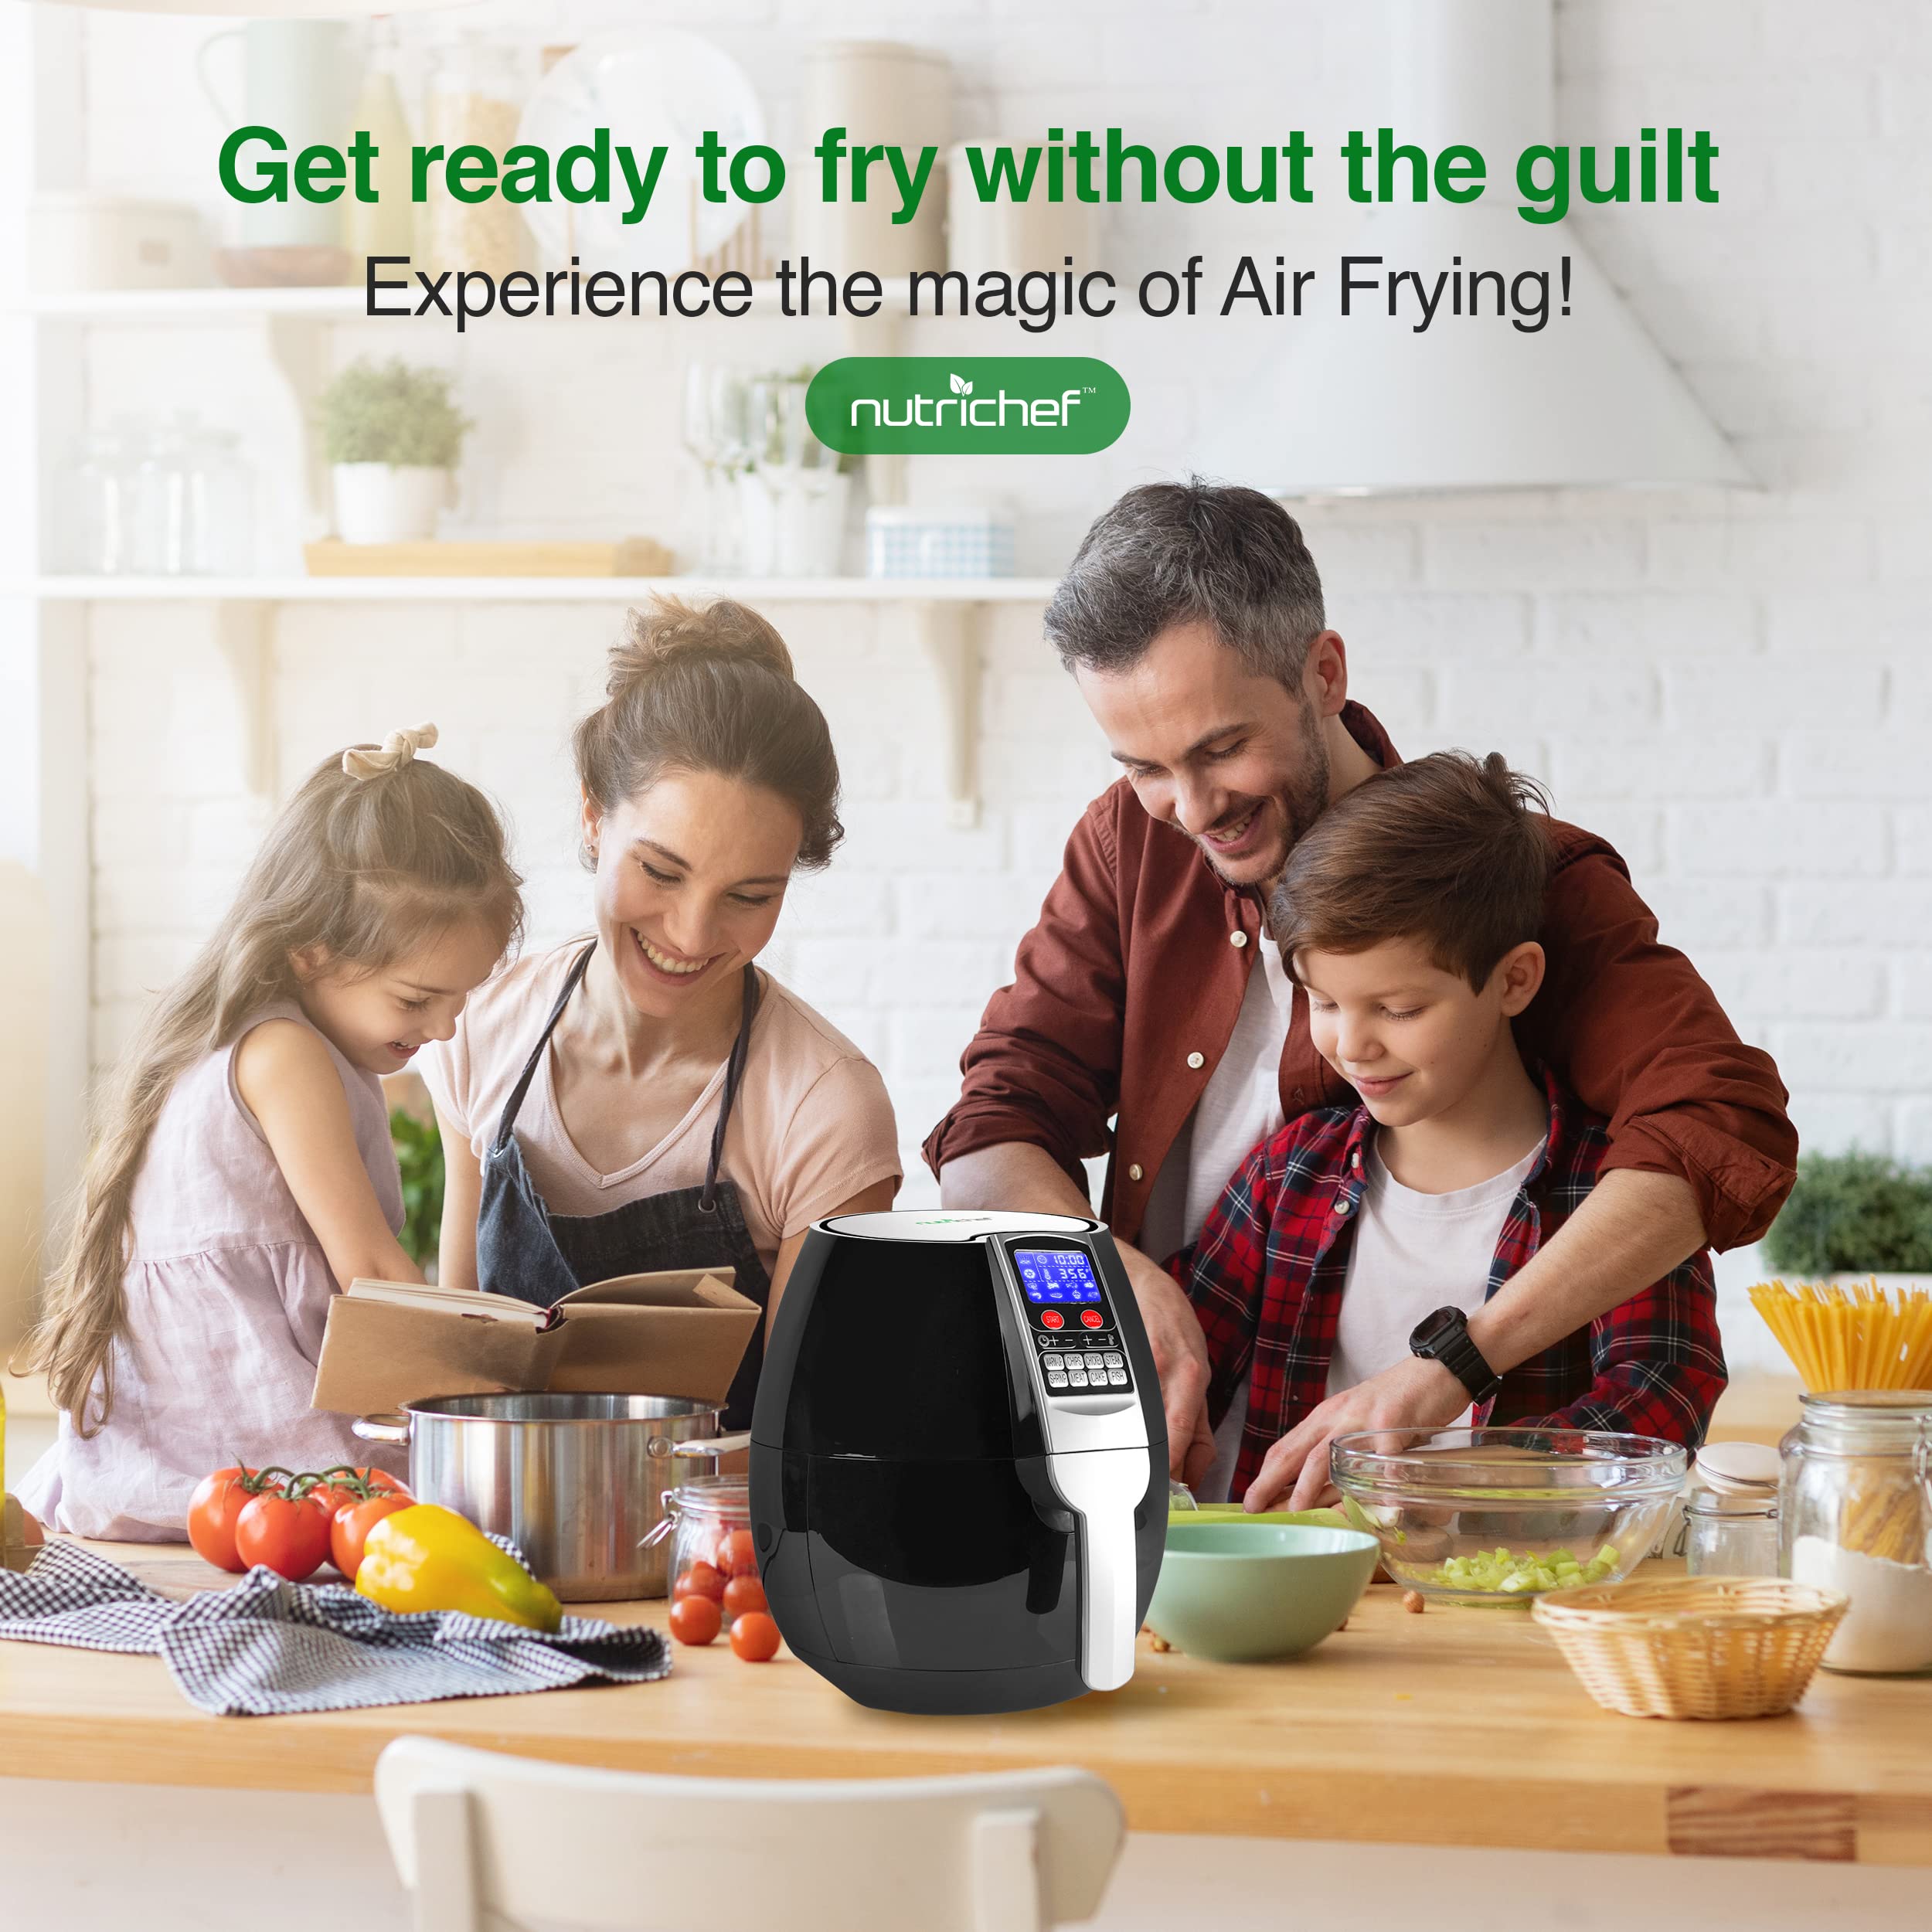 Hot Air Fryer Oven - Oilless Convection Power Multi Cooker with Digital Display and 3.7 Qt Capacity - Perfect for Baking, Grilling, and More - Includes Basket Pan - Stainless Steel